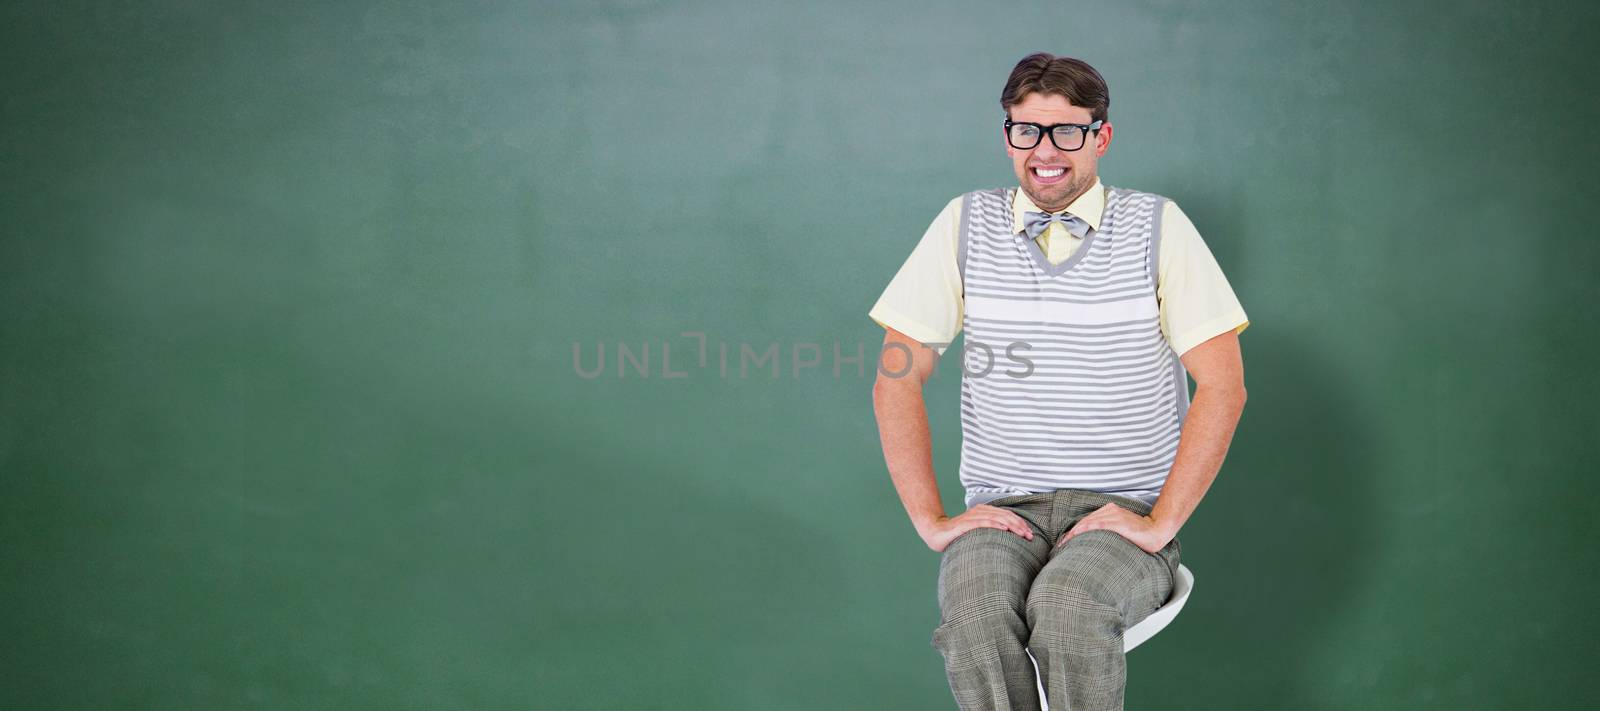 Geeky hipster sitting on stool against green chalkboard